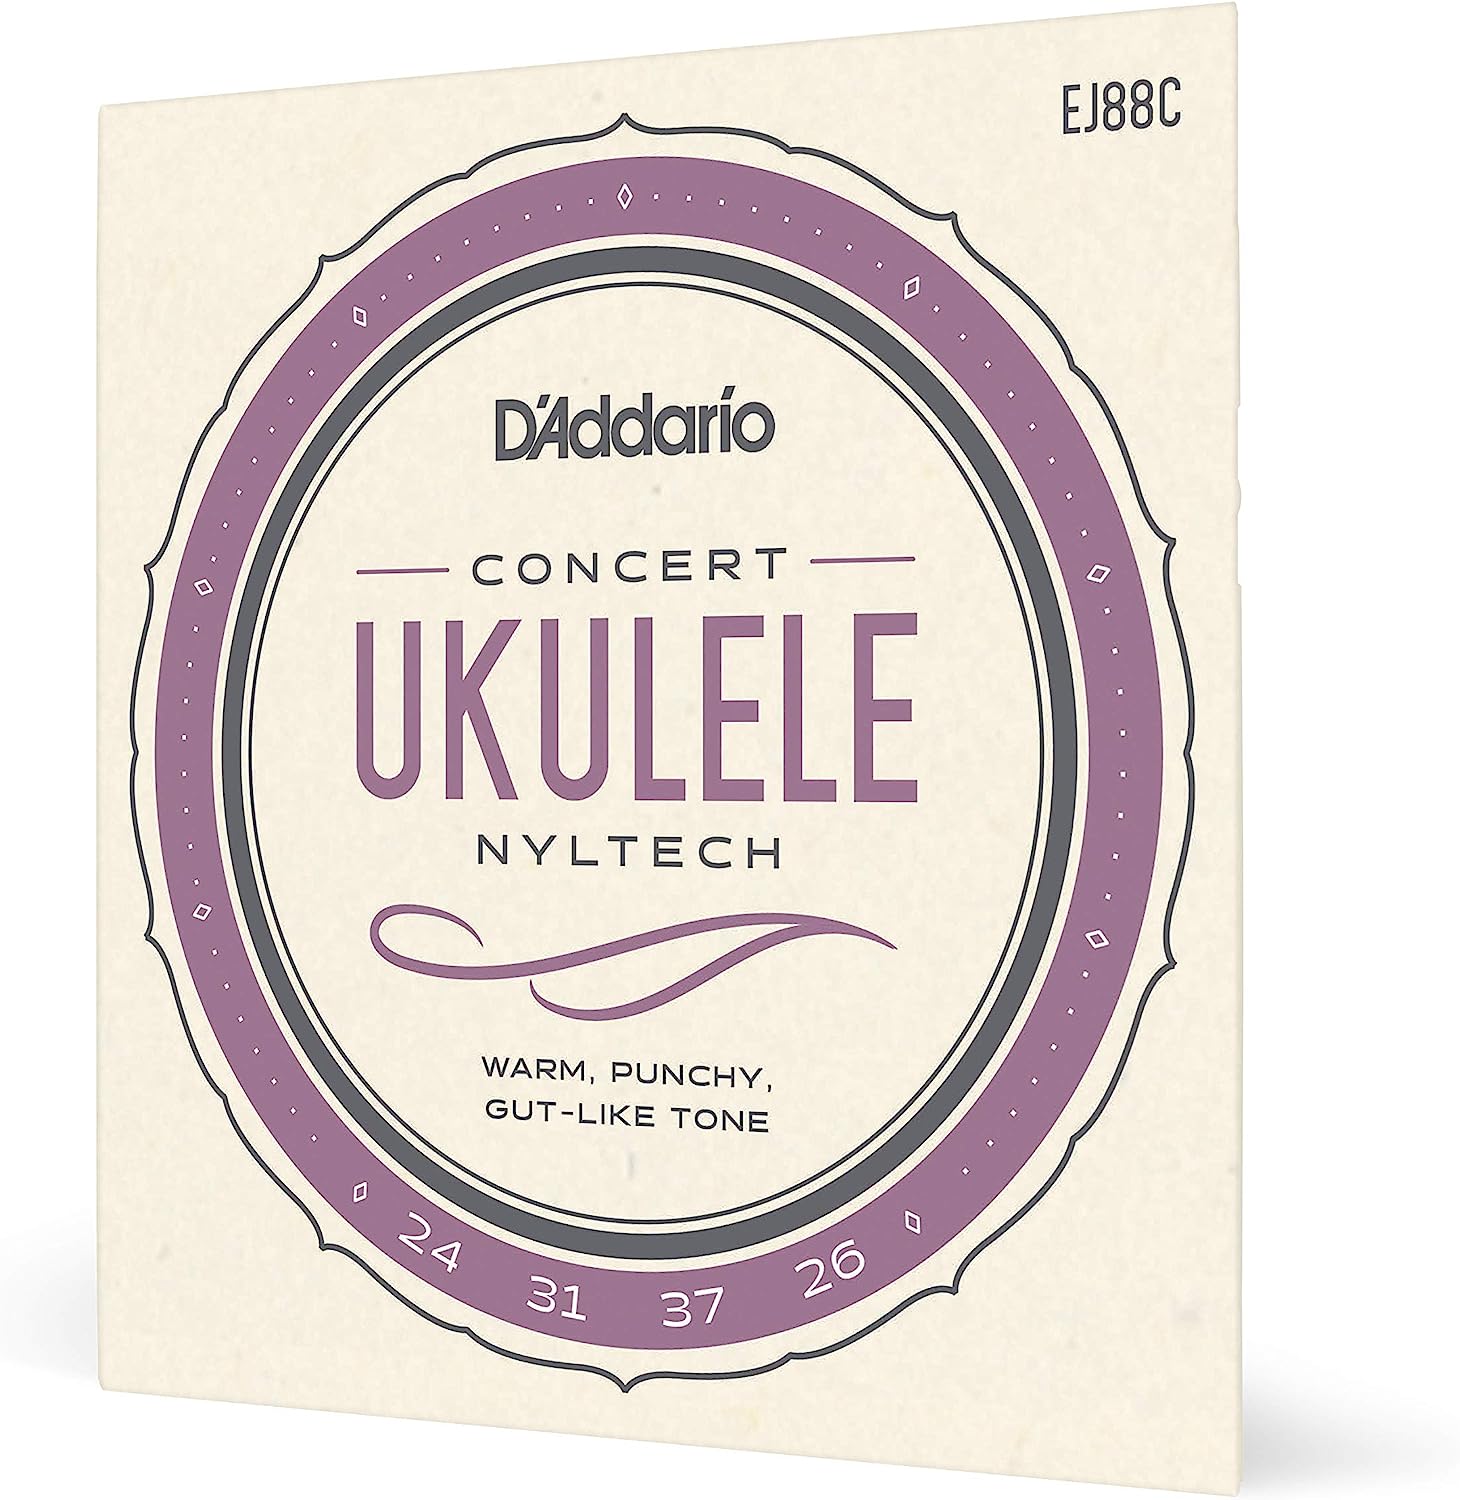 D'Addario Nyltech Ukulele Strings - Concert | Musical Accessories | Halabh.com